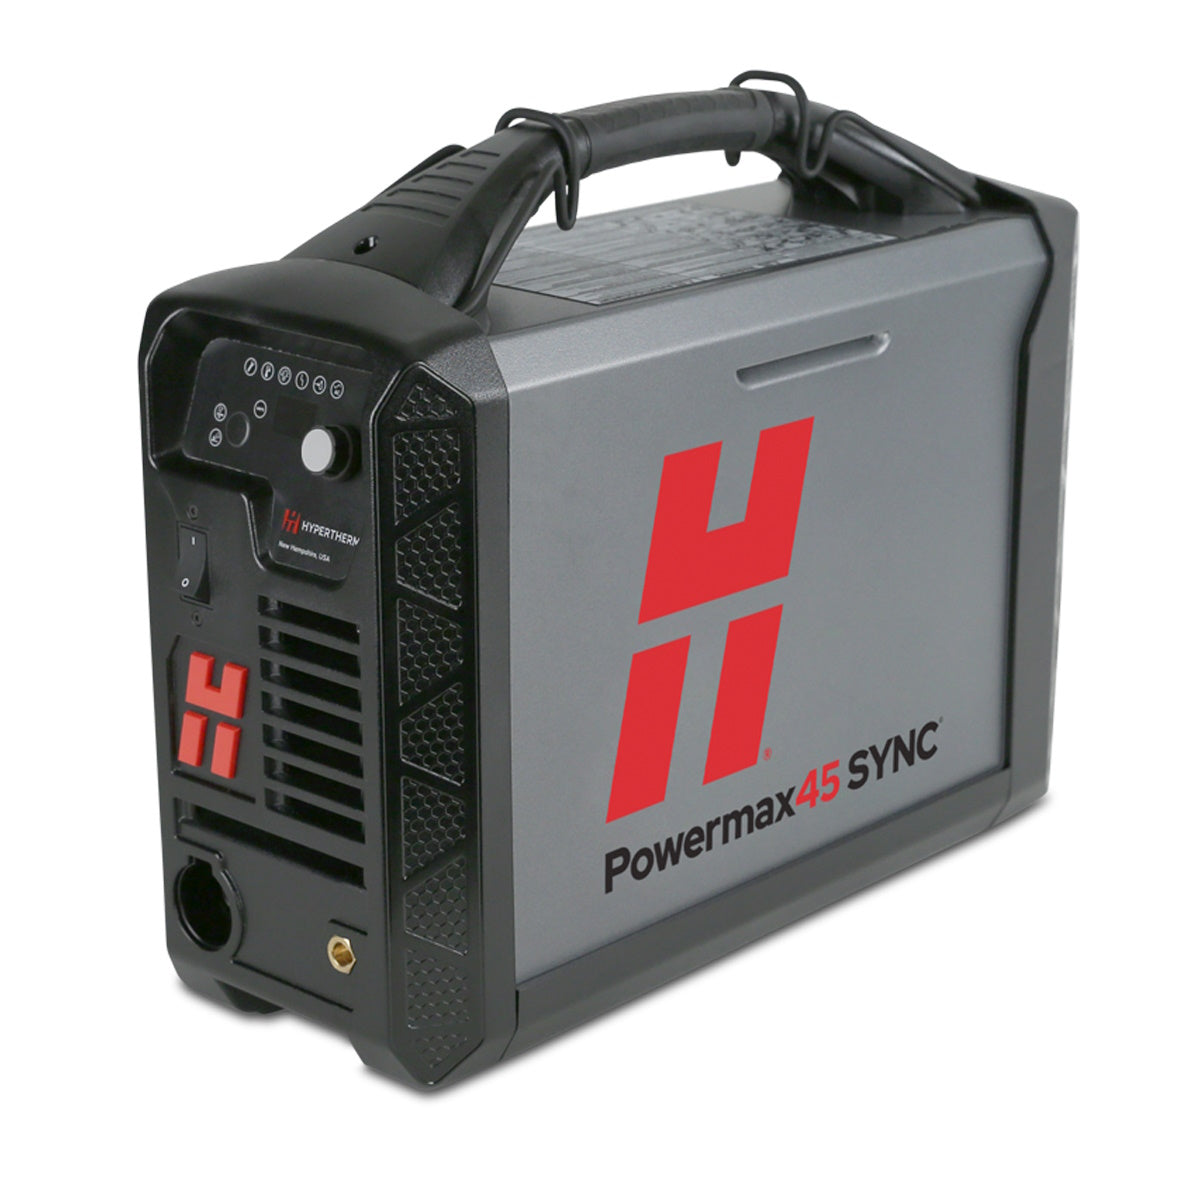 Hypertherm Powermax45 SYNC Plasma Cutter with 20ft Hand Torch (088560)